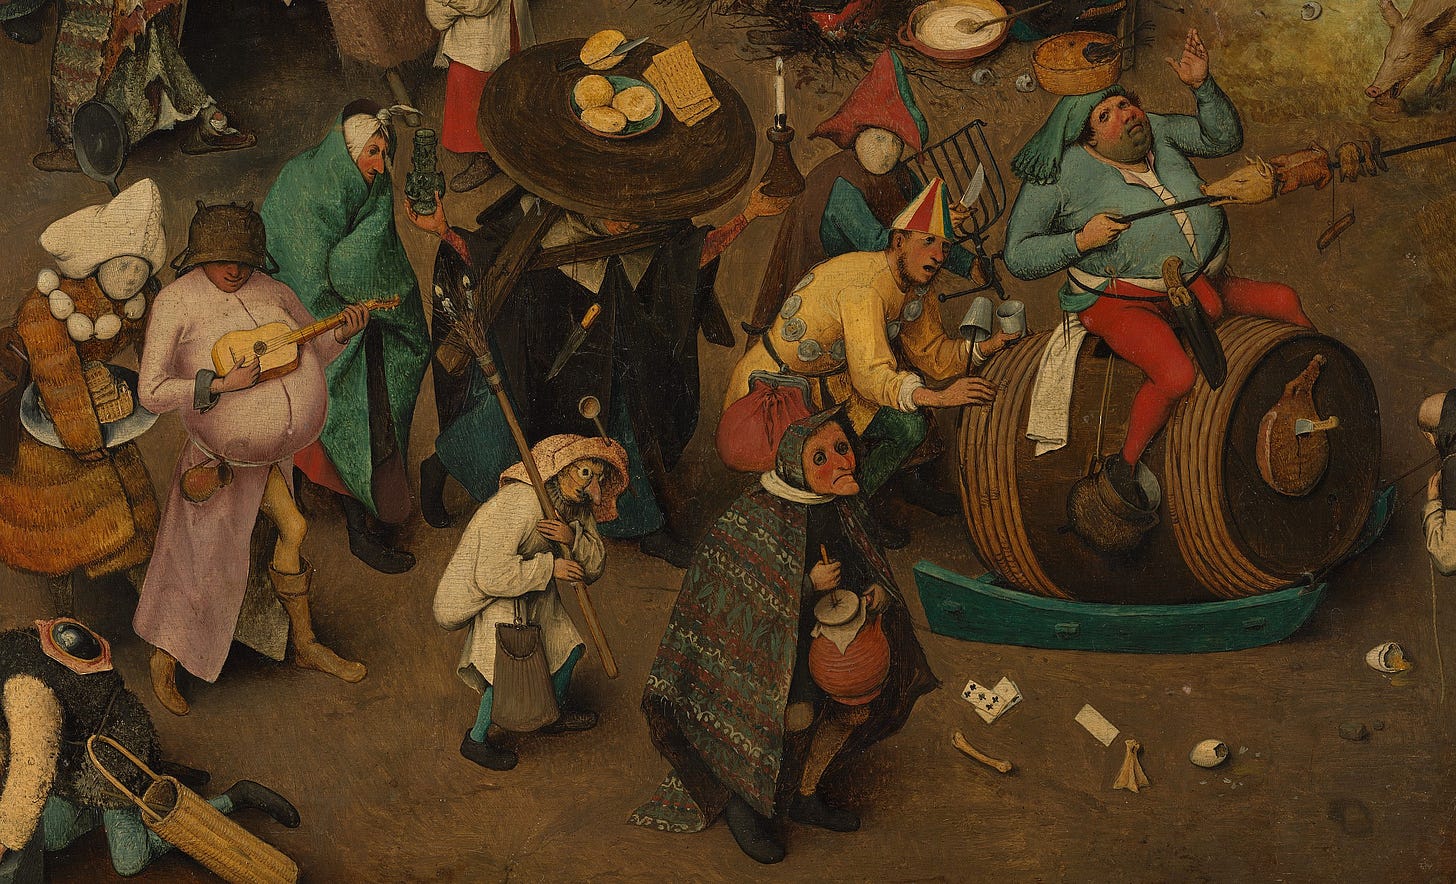 File:Bruegel - The Fight between Carnival and Lent - detail Prince Carnival  and his retinue.jpg - Wikimedia Commons